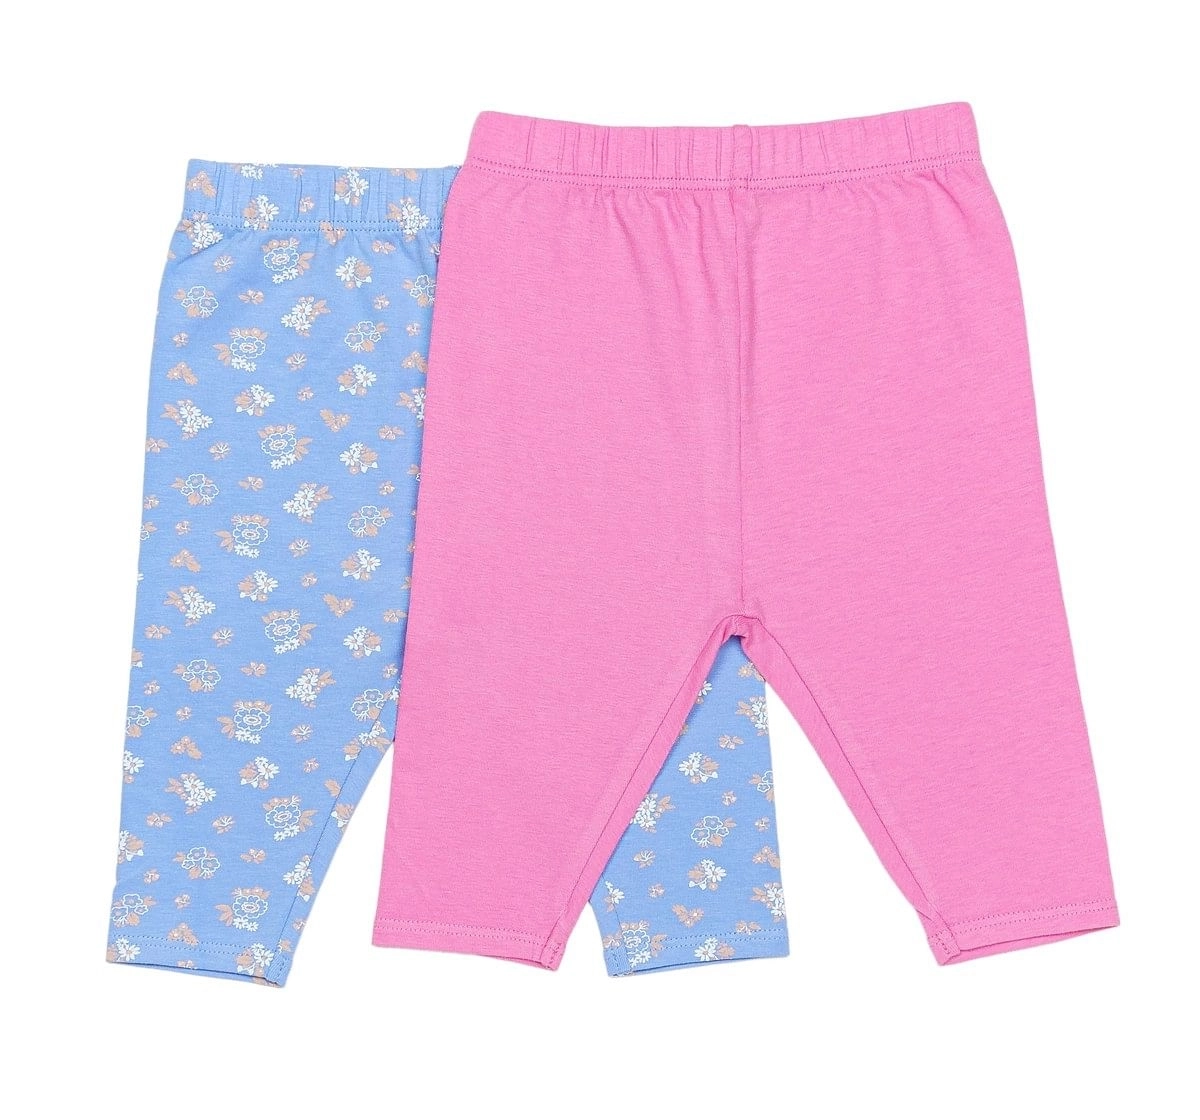 Girls leggings with colourful patterns – Anvi kids